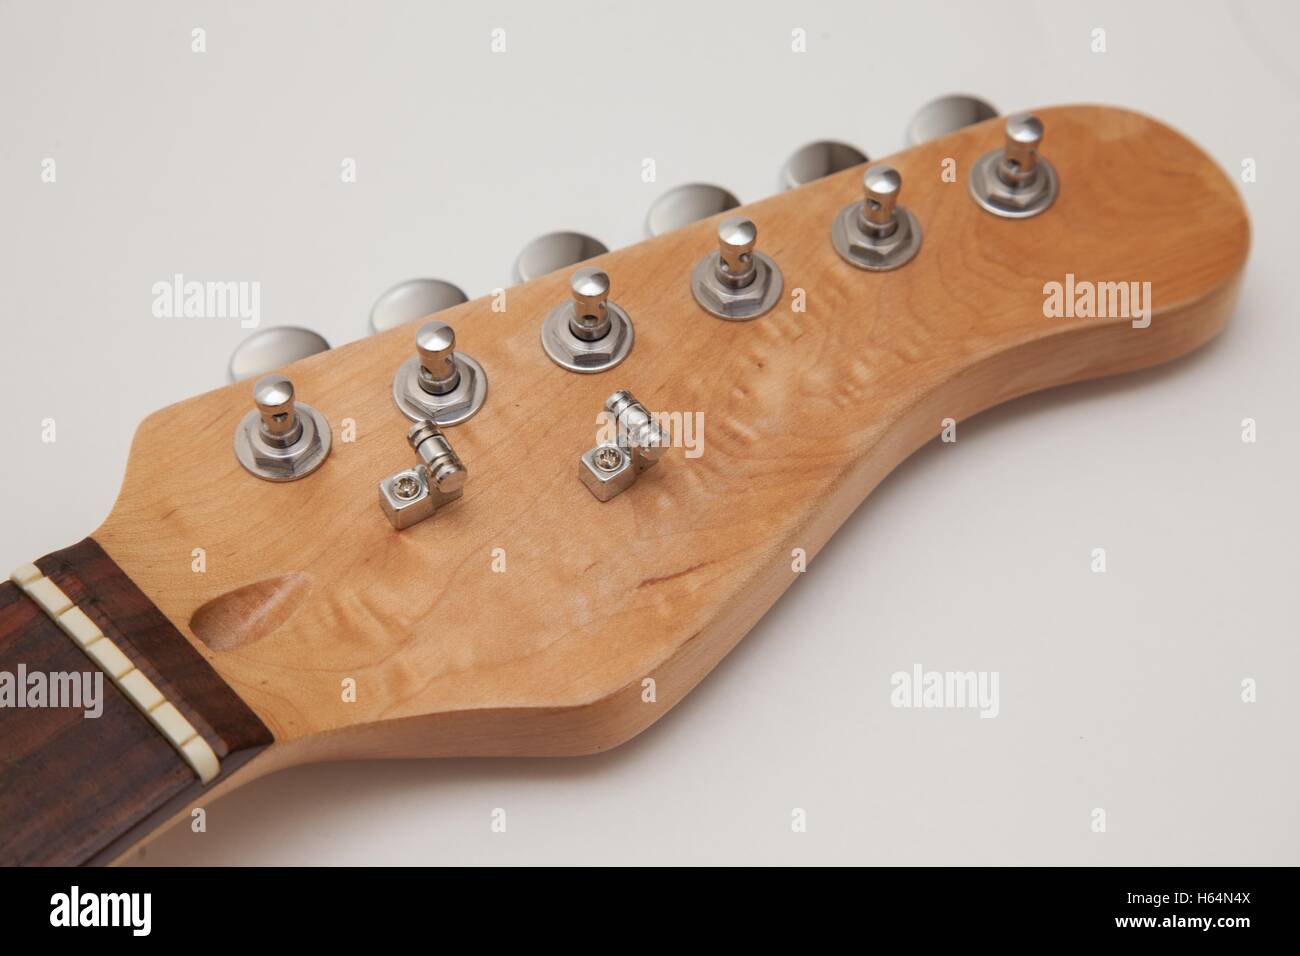 Tuners on the headstock of a maple electric guitar neck with a rosewood fretboard, roller string trees attached Stock Photo